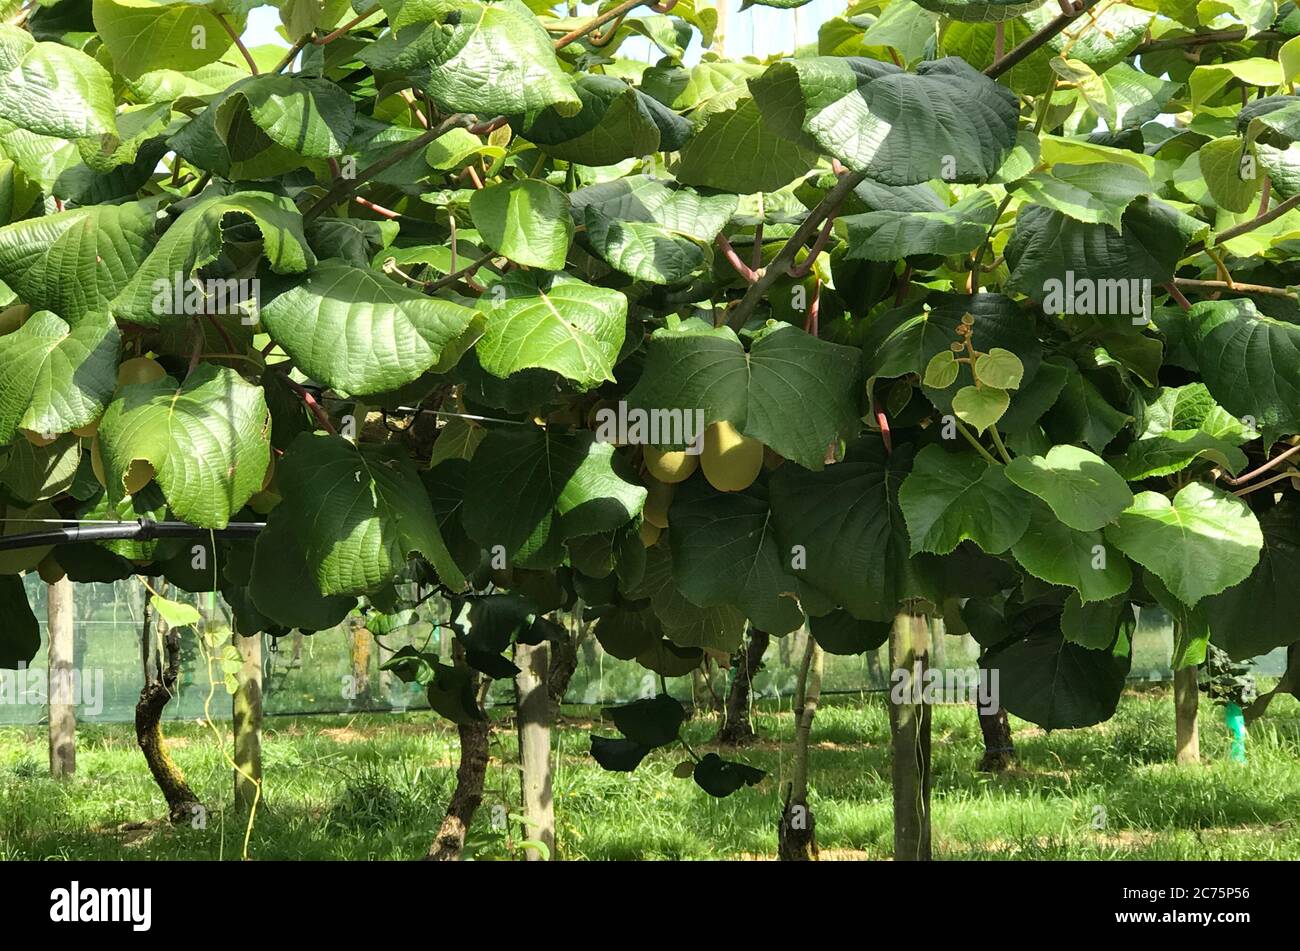 Kiwifruit, or Chinese gooseberry, is the edible berry of several species of woody vines in the genus Actinidia. Stock Photo